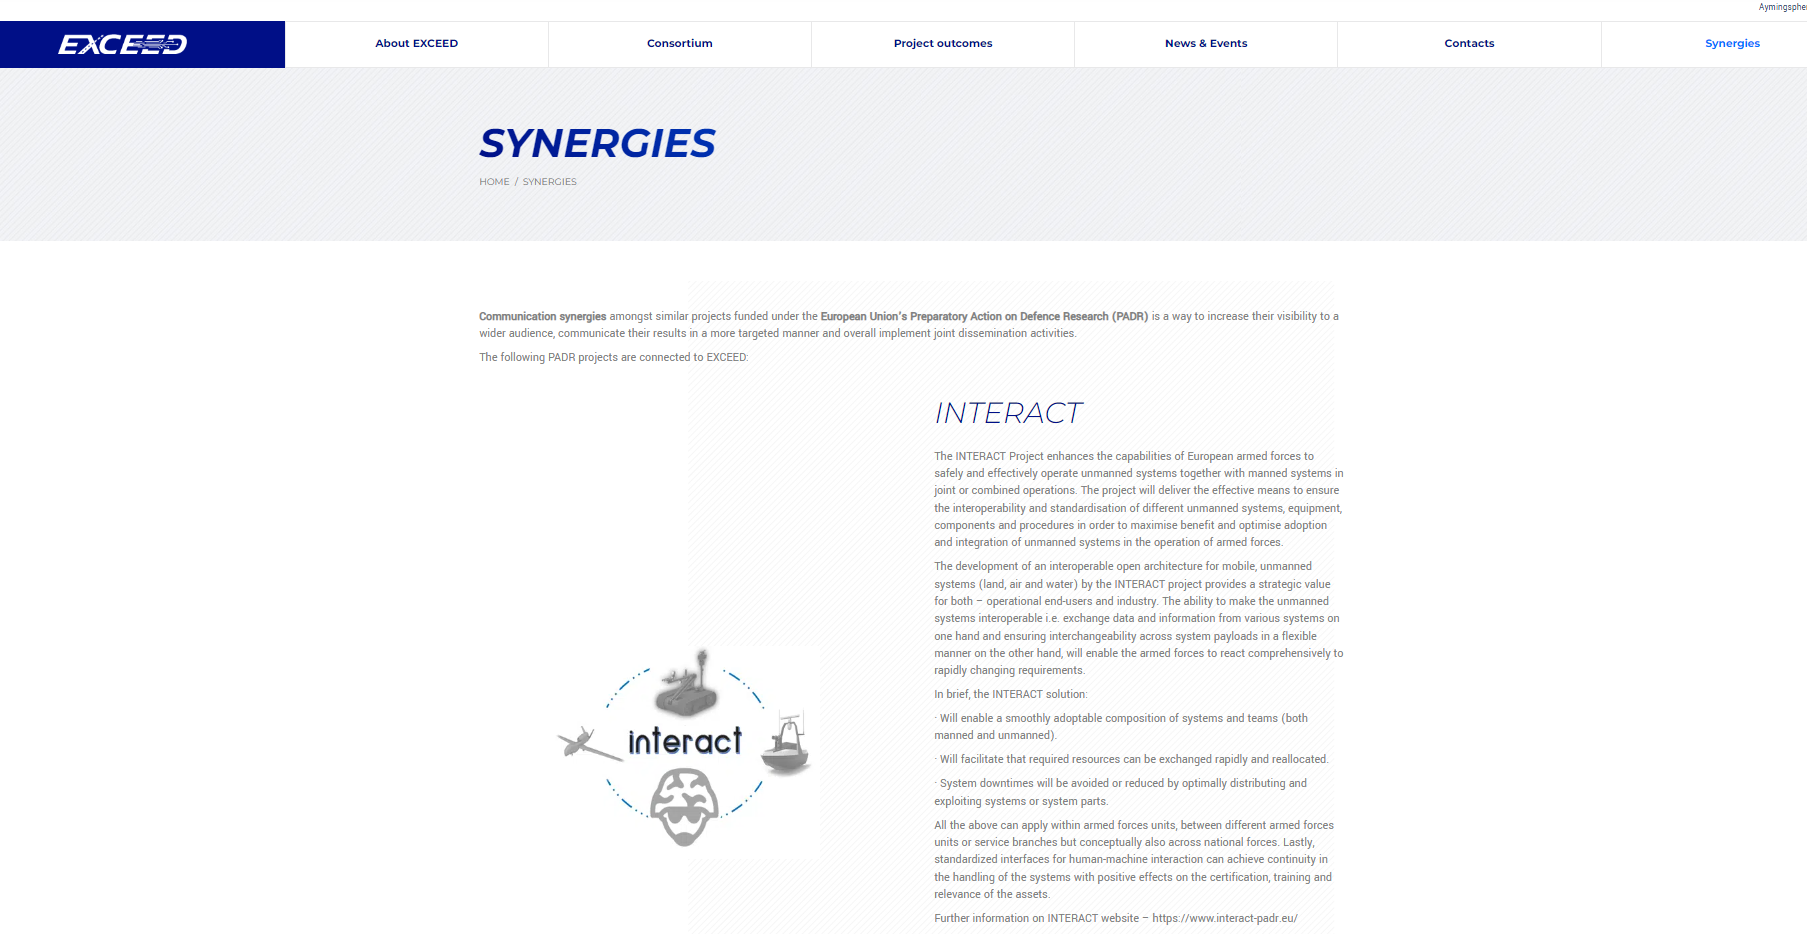 INTERACT featured at EXCEED PADR Website | News from synergy projects